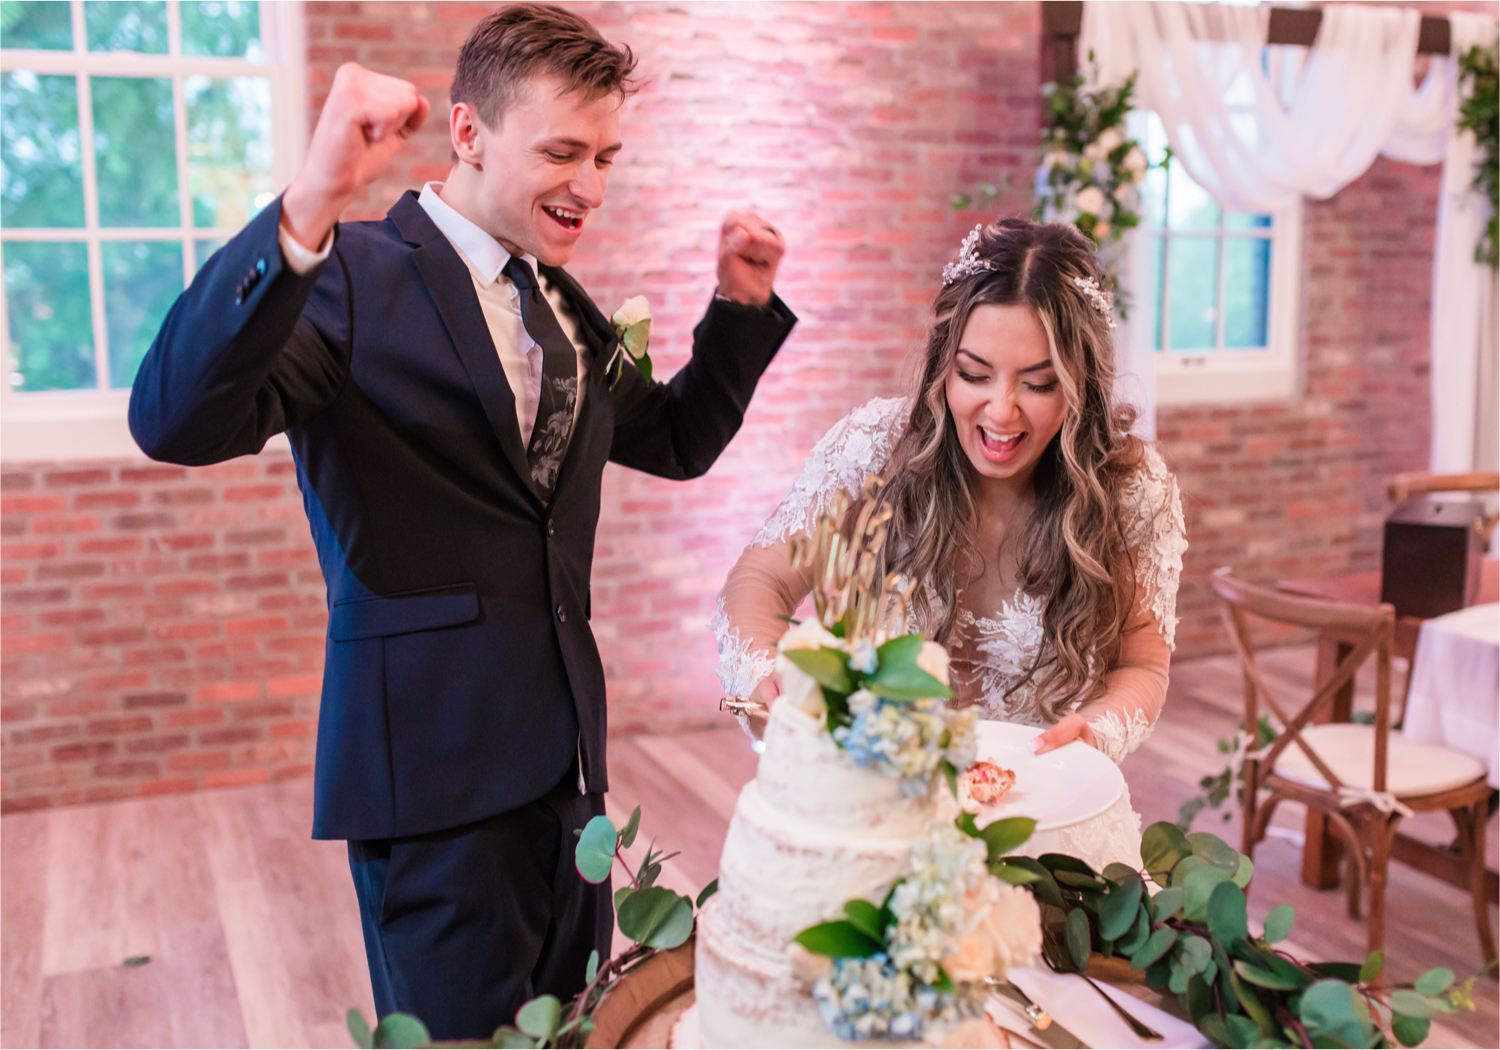 Romantic and Rustic Wedding at The Mill in Windsor | Britni Girard Photography | Colorado based wedding photography and videography team | Cake cutting with live singer